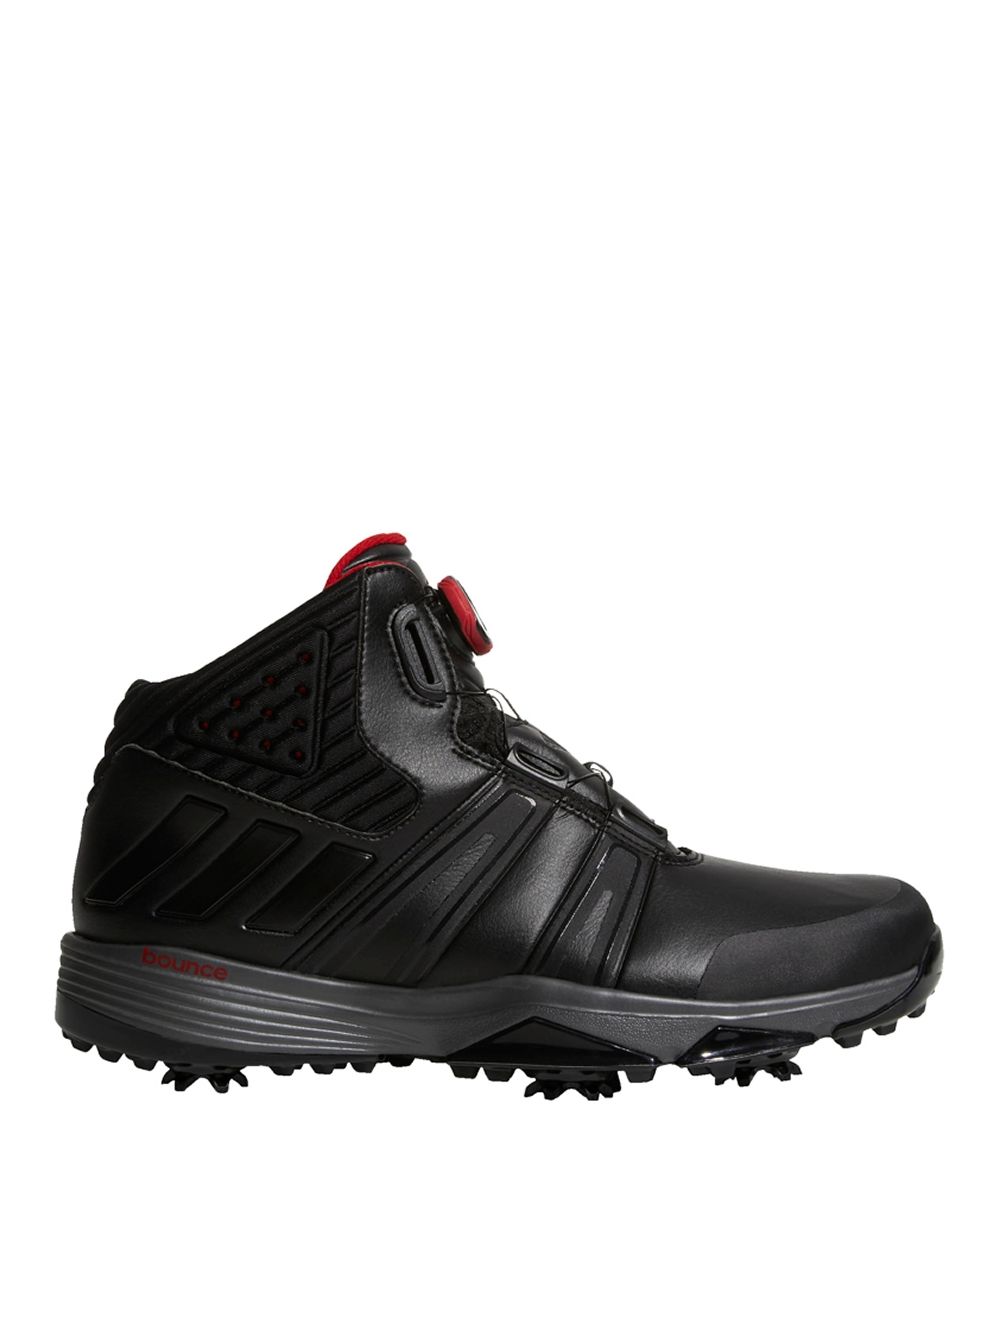 adidas climaproof golf shoes